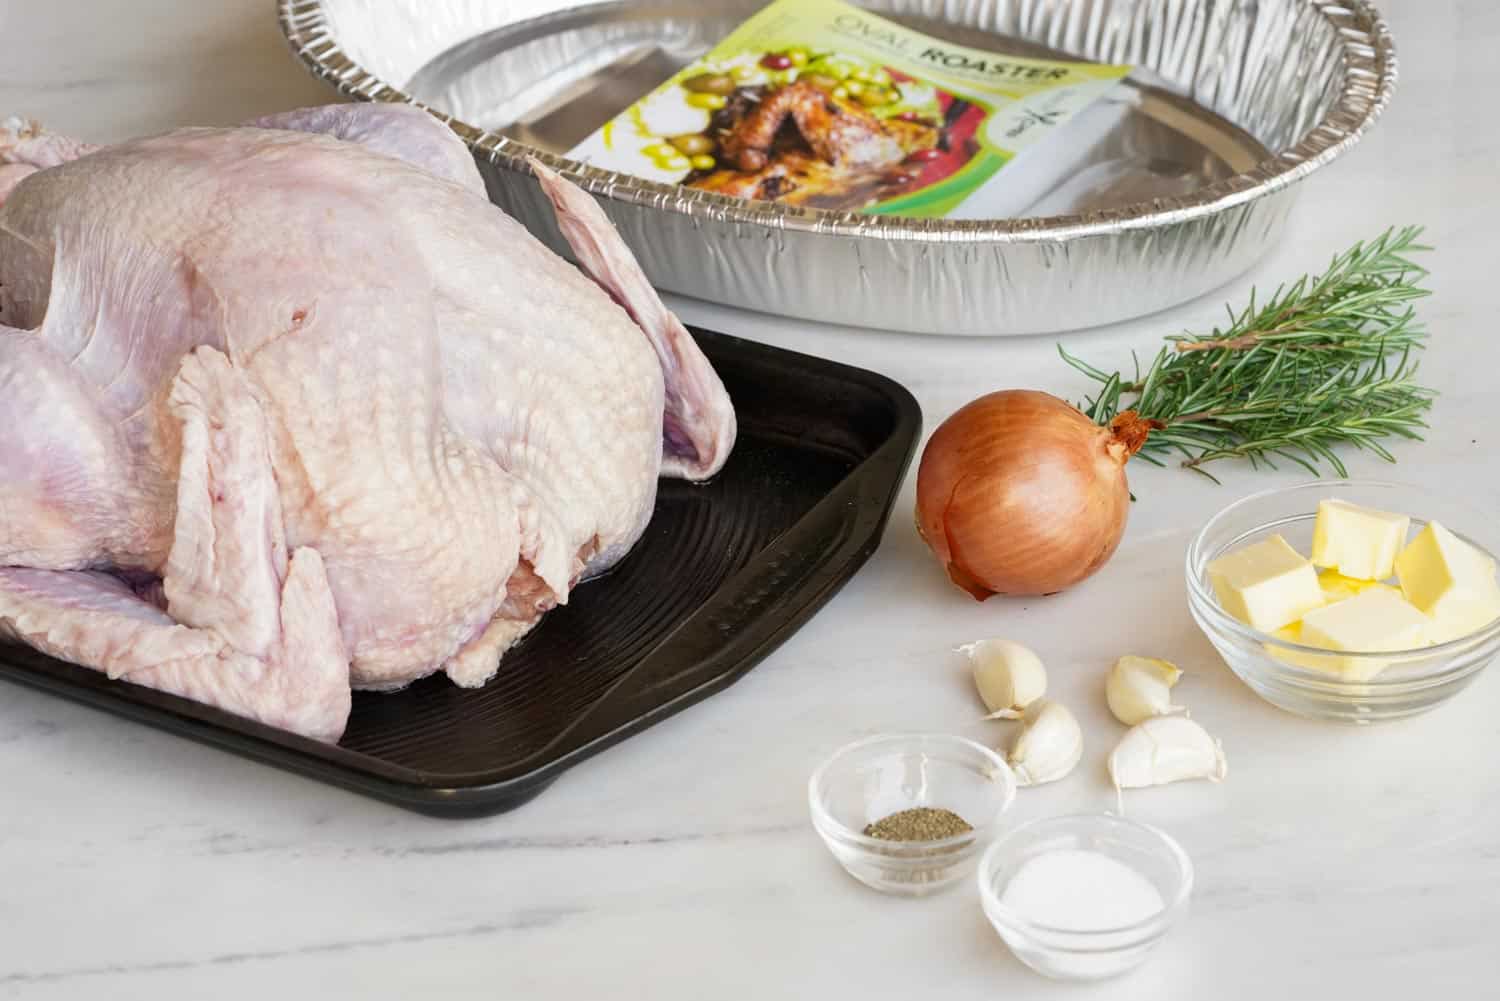 Ingredients needed for grilling a turkey